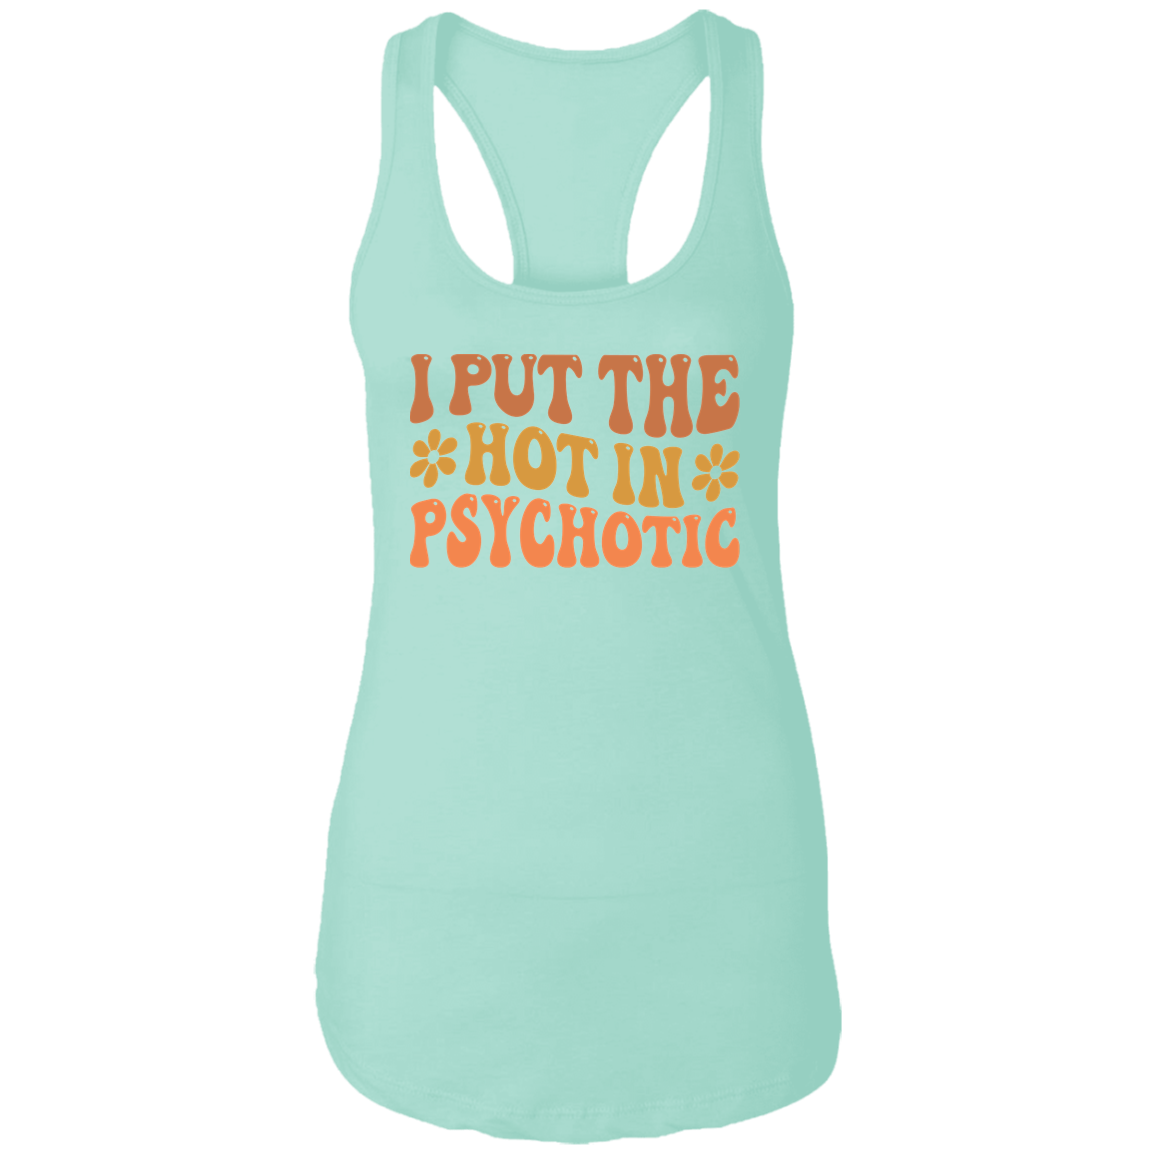 I Put The Hot In PsycHOTic Tank Top - Thoughtful Blossom